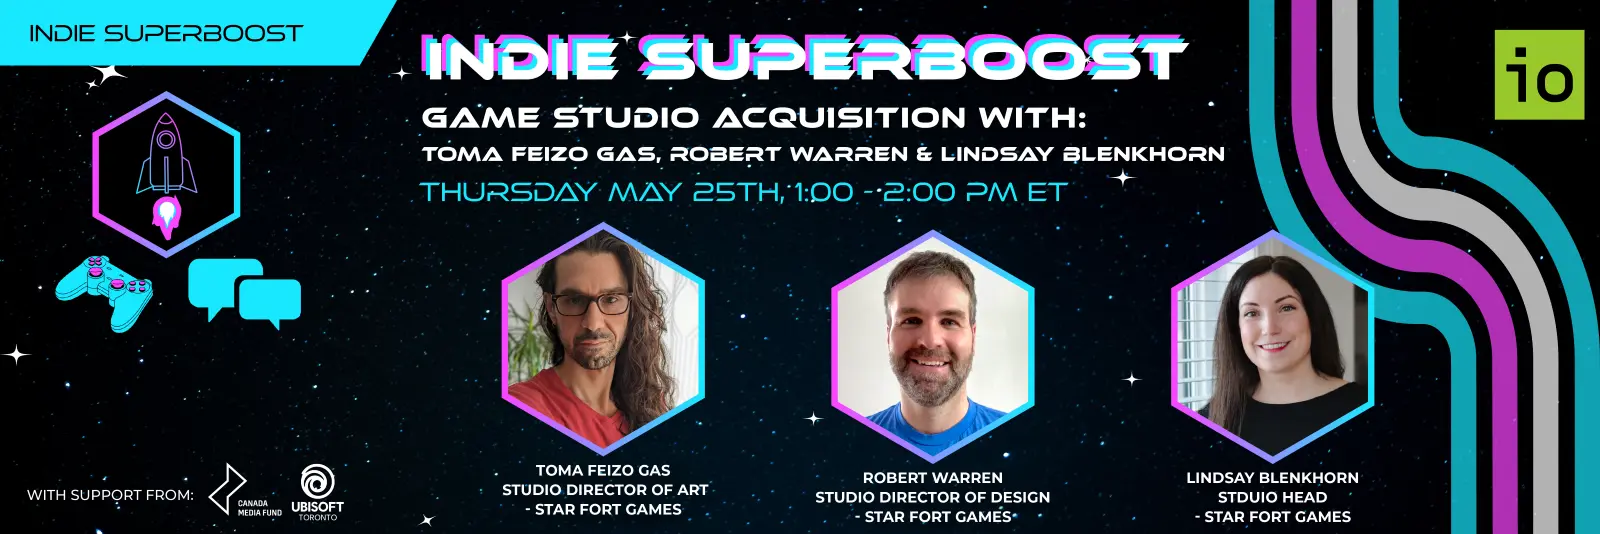 Toma Feizo Gas, Robert Warren & Lindsay Blenkhorn from Star Fort will be discussing game studio aquisition at IO's latest Indie Superboost.